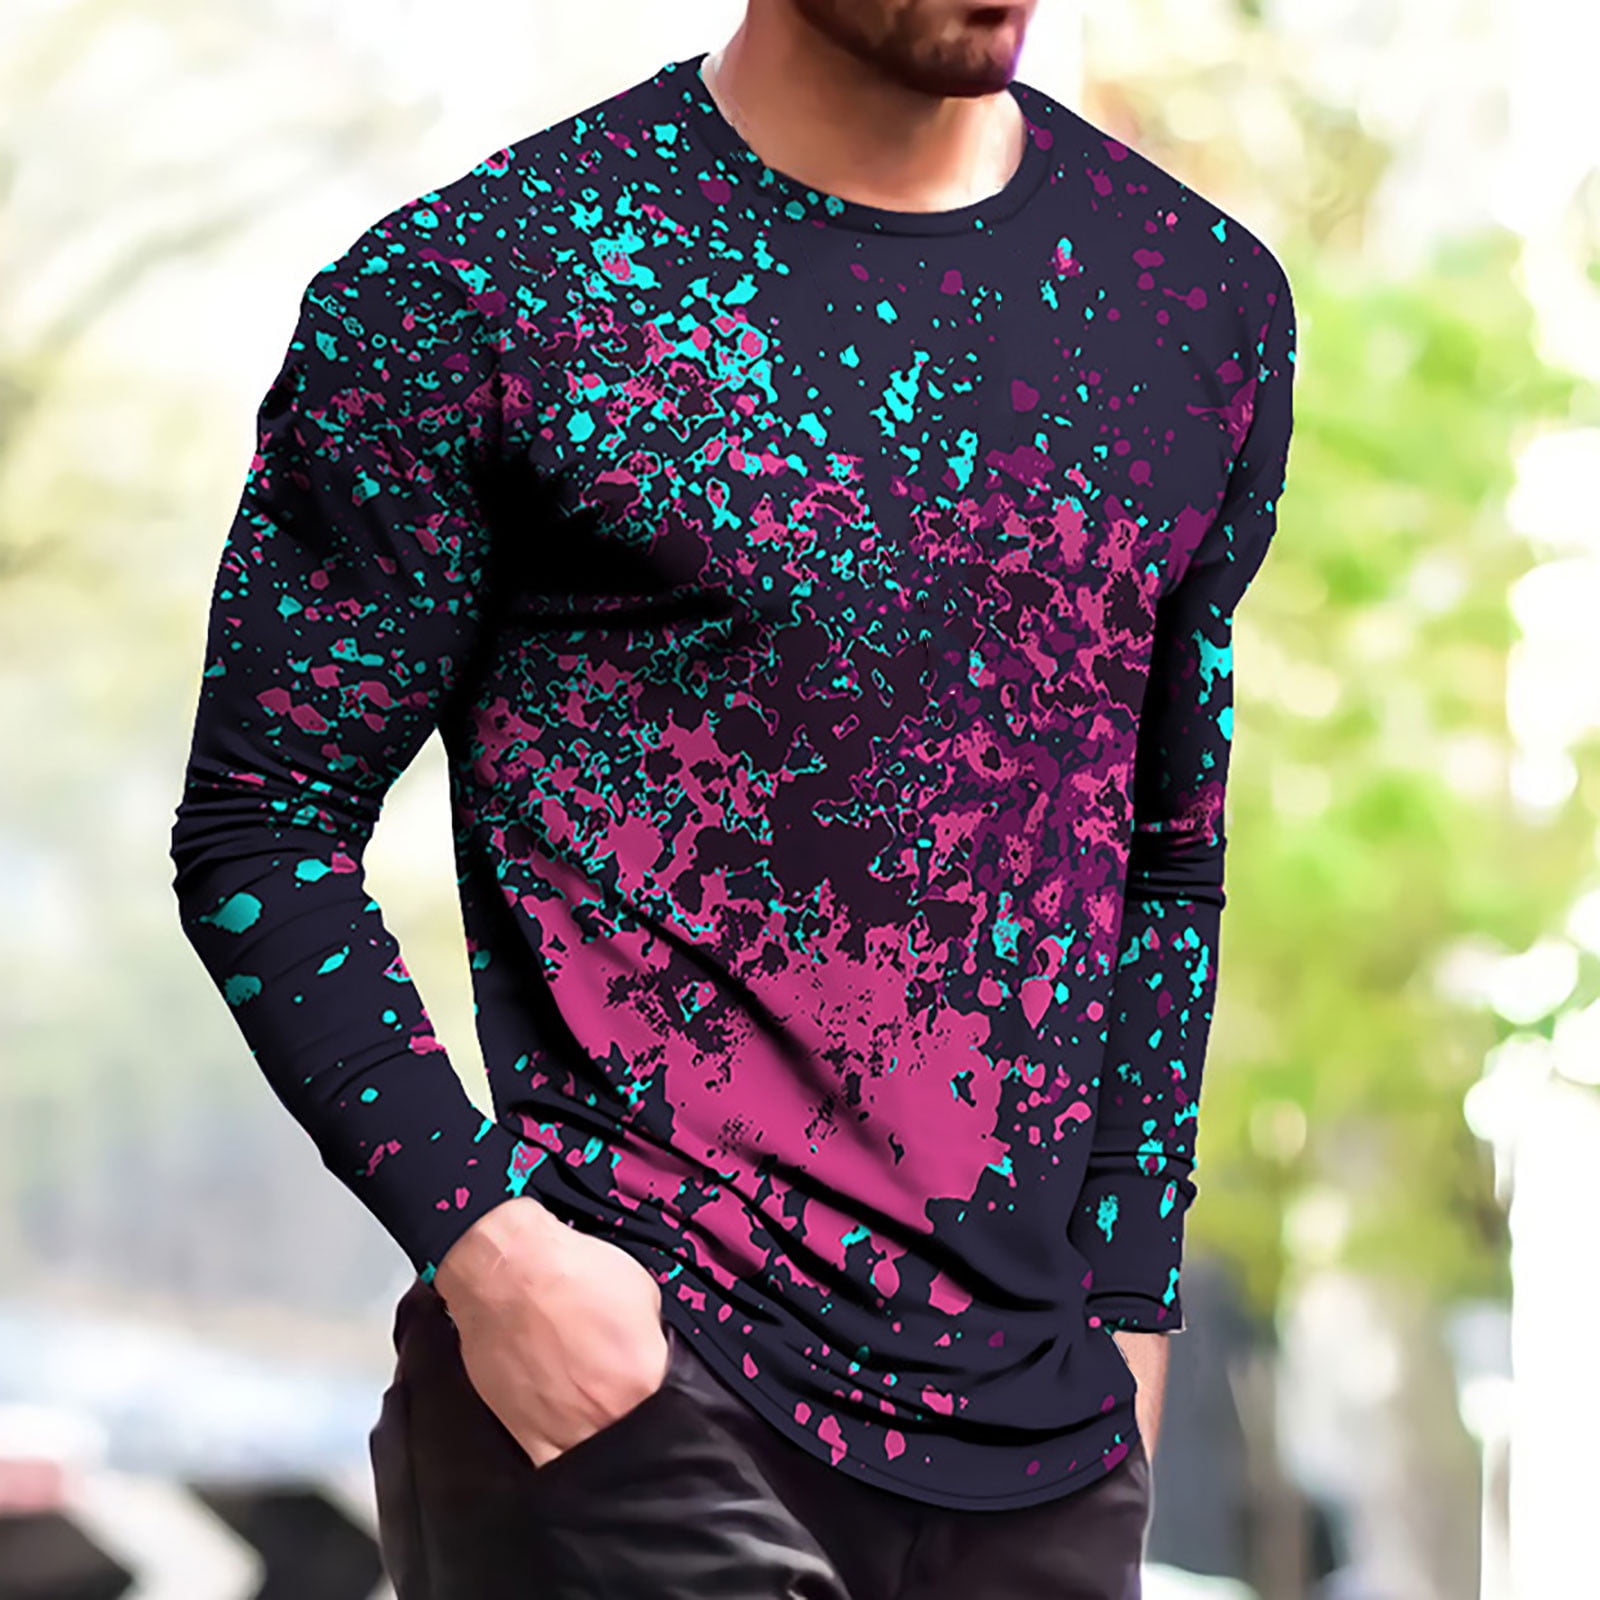 Mens Cotton Round Neck Sleeve T Shirt Comfy Casual Tops 